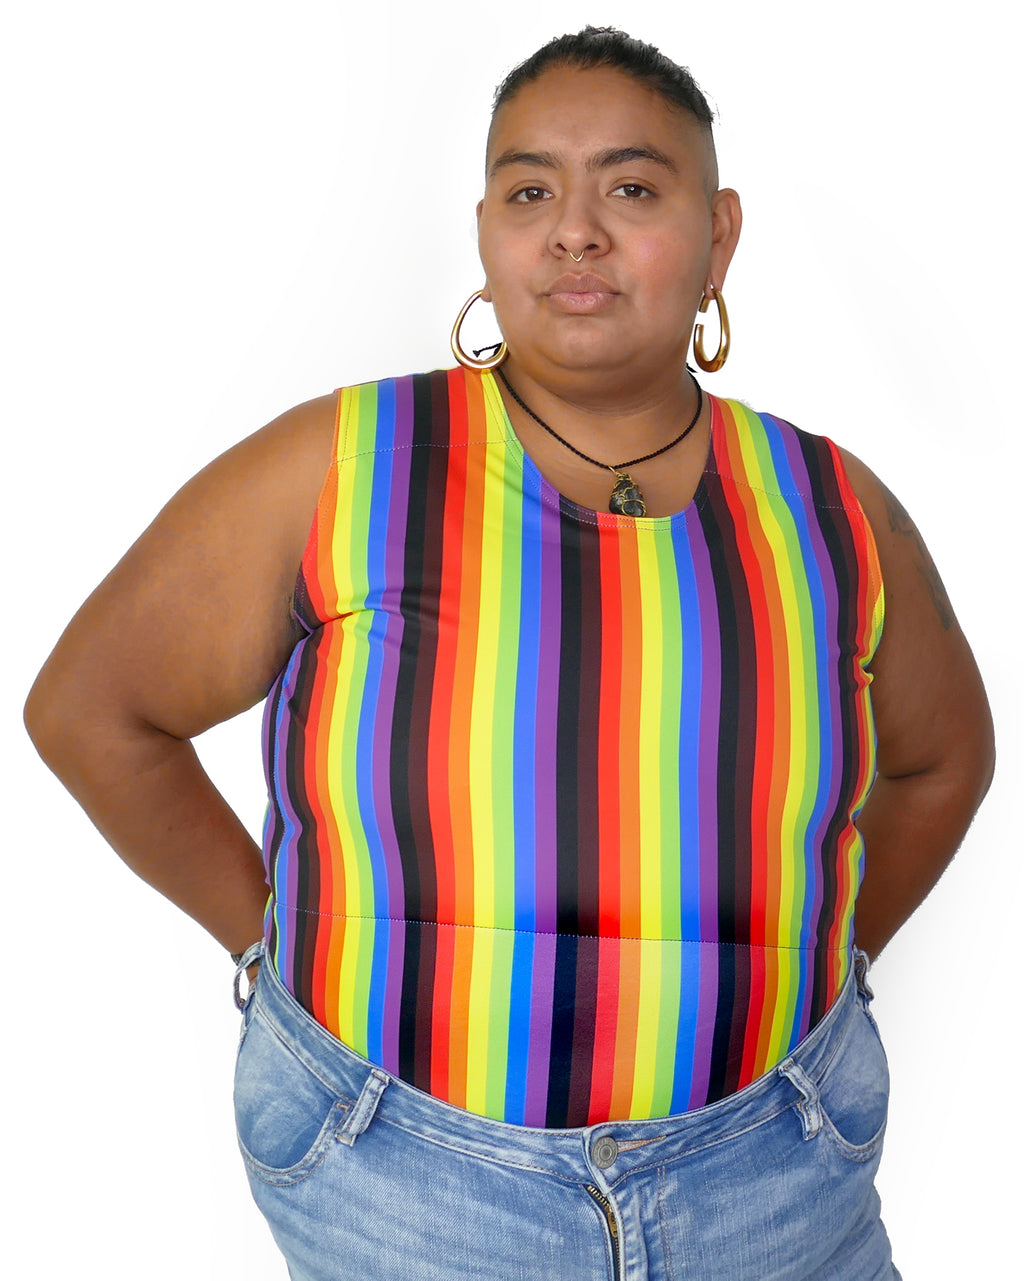 Person wearing More Color More Pride Binder, with Rainbow, Black and Brown vertical stripes.